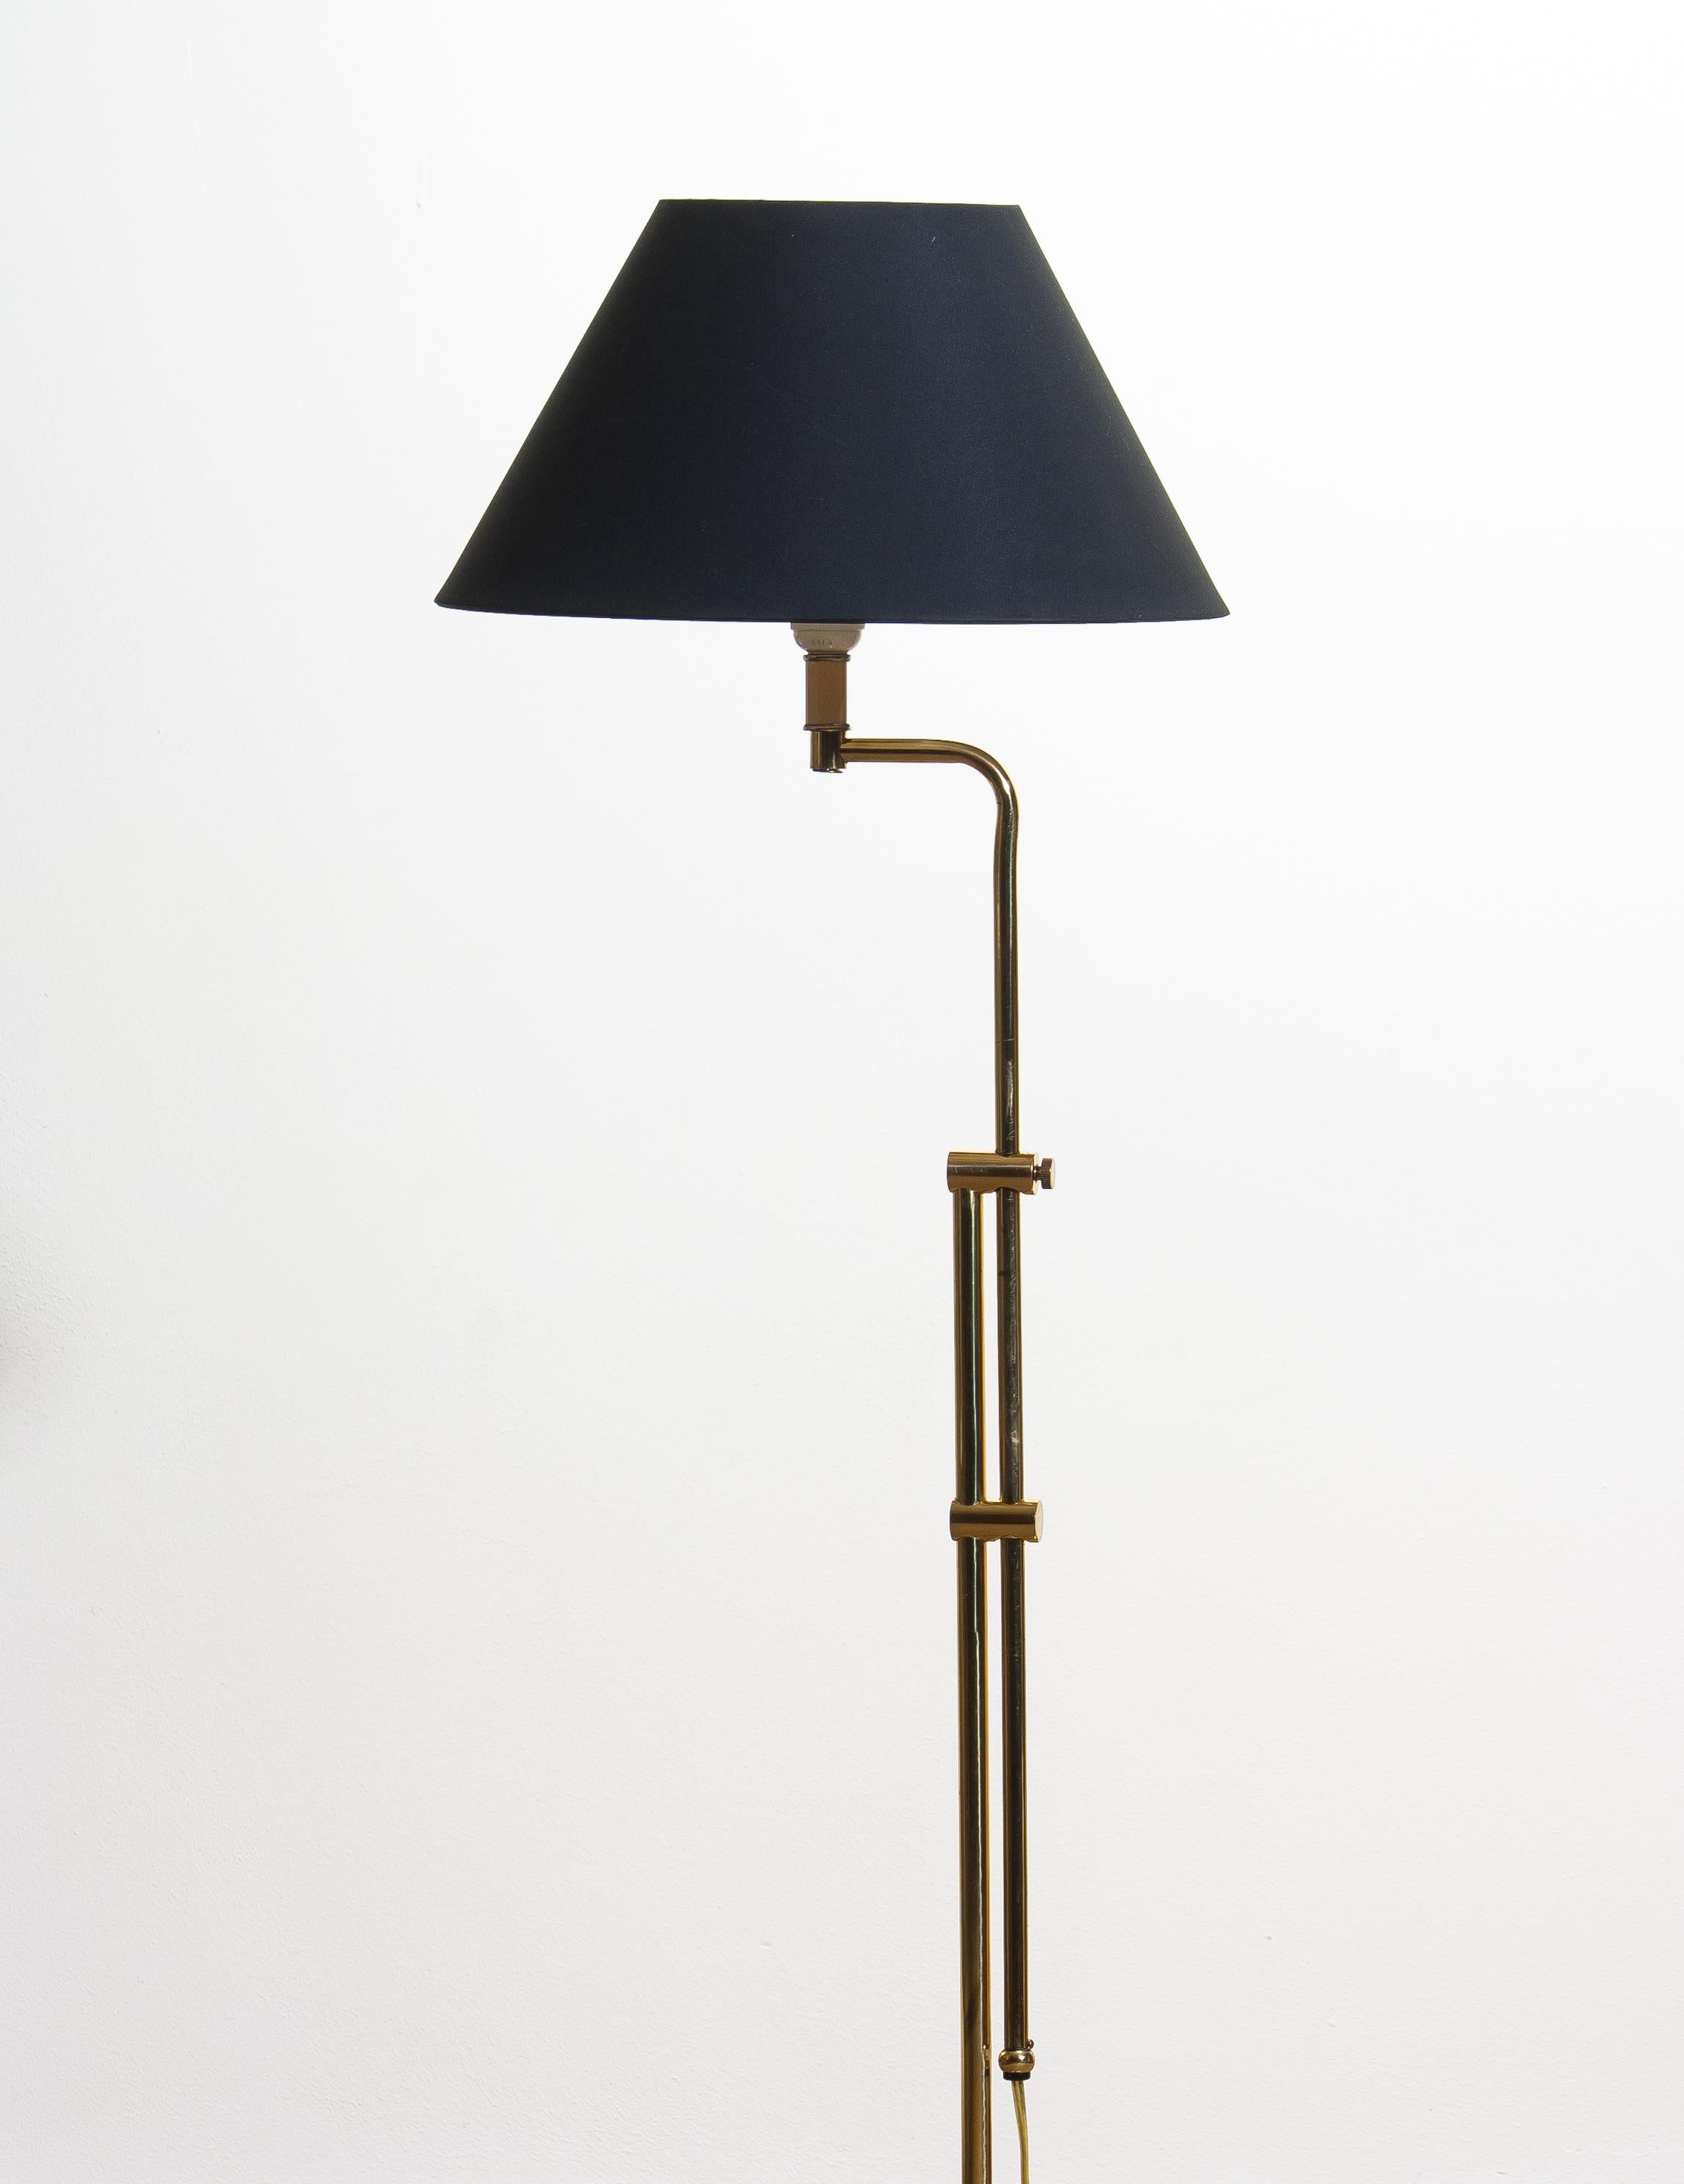 Beautiful tall brass Hollywood Regency swing arm floor lamp.
Newly wired and fitting. Size E27/28 for Europe and US.
Period 1970.
Height is adjustable from 110 - 155 cm / 43 - 61 inch.
ø floor stand: 23 cm / 9 inch.